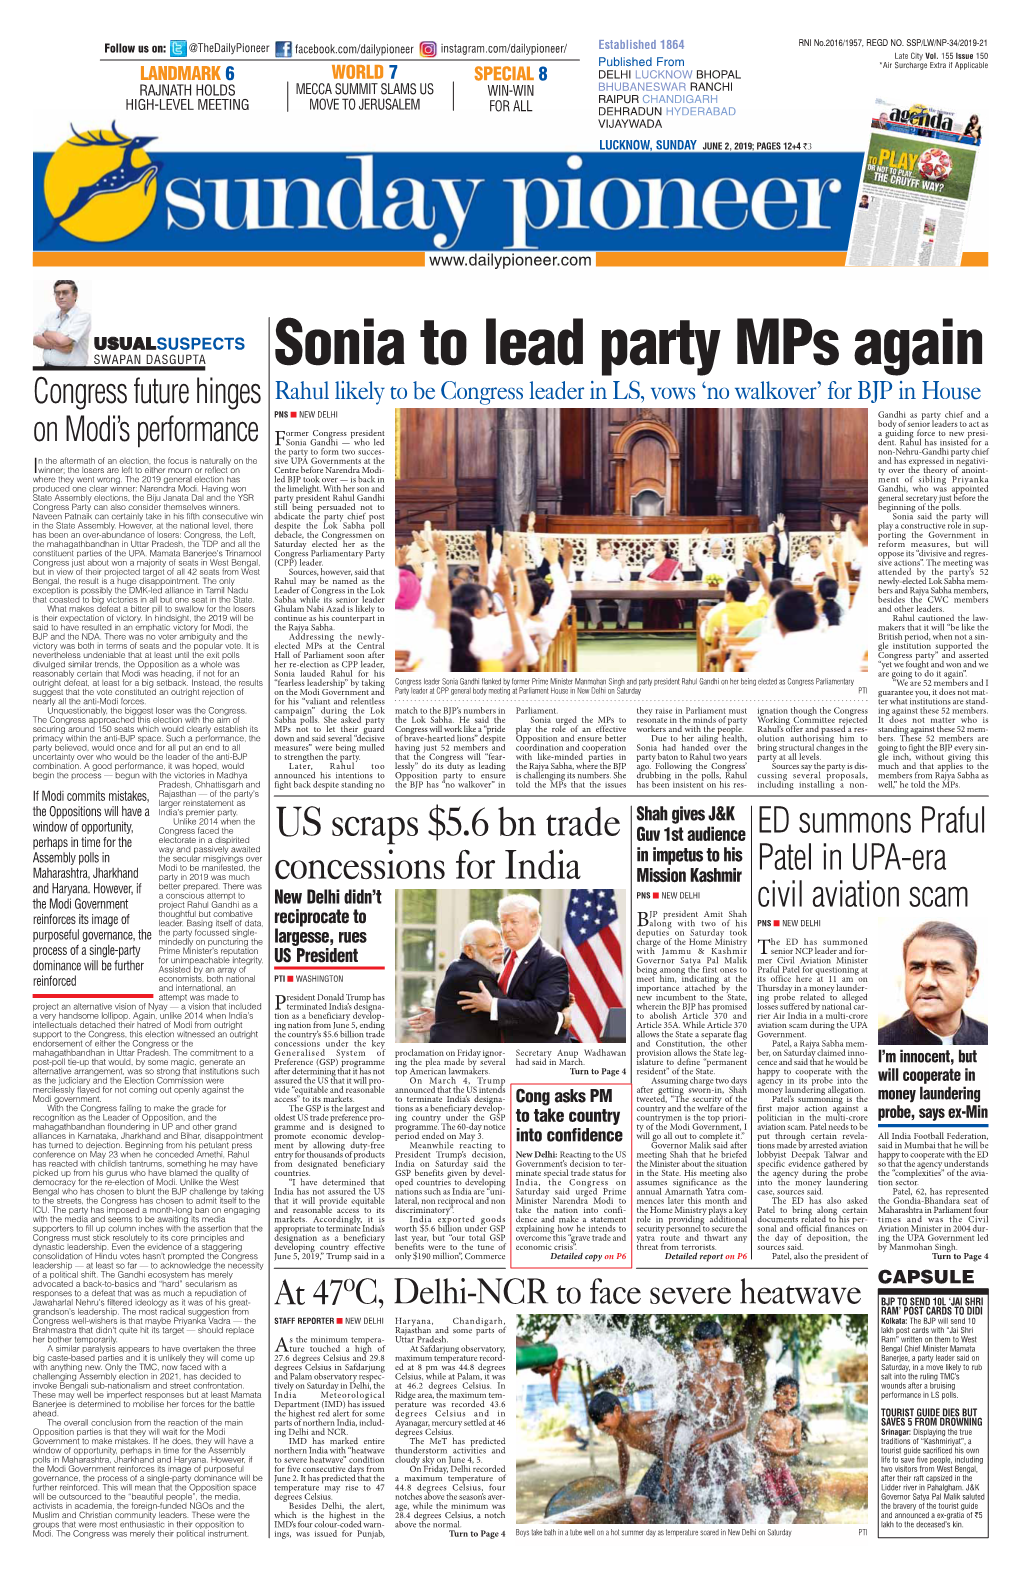 Sonia to Lead Party Mps Again